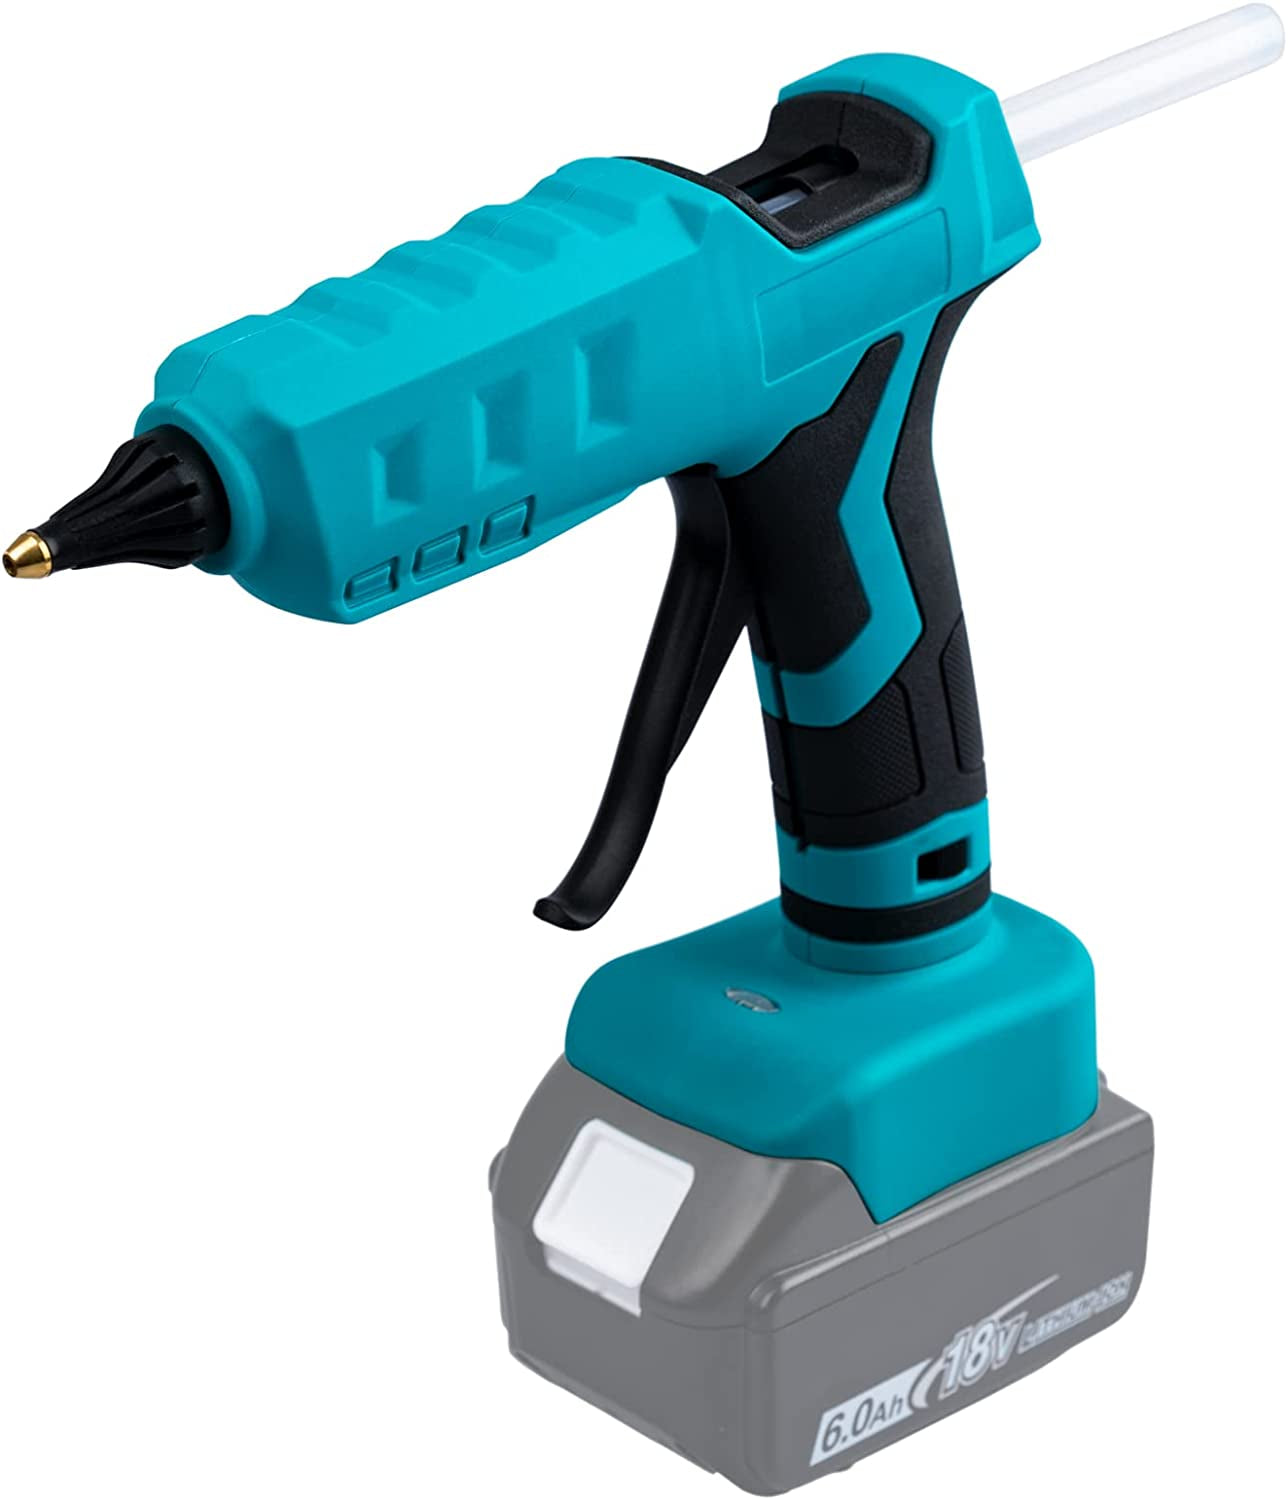 Mellif, Mellif Cordless Hot Glue Gun for Makita 18V Battery, Handheld Electric Power Glue Gun Full Size for Arts & Crafts & DIY with 20 Glue Sticks (Battery Not Included)